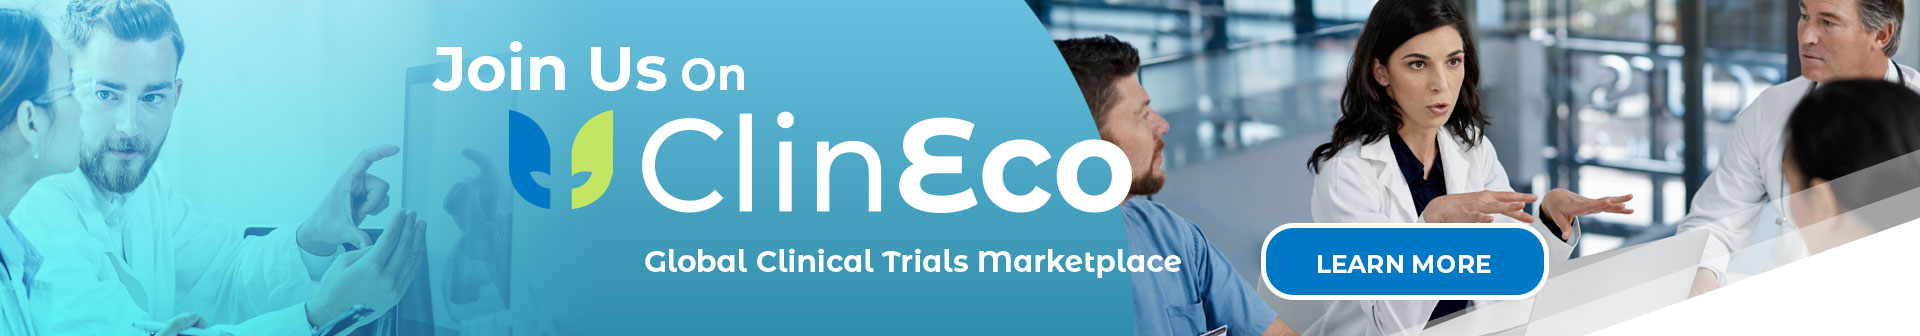 ClinEco Banner Image